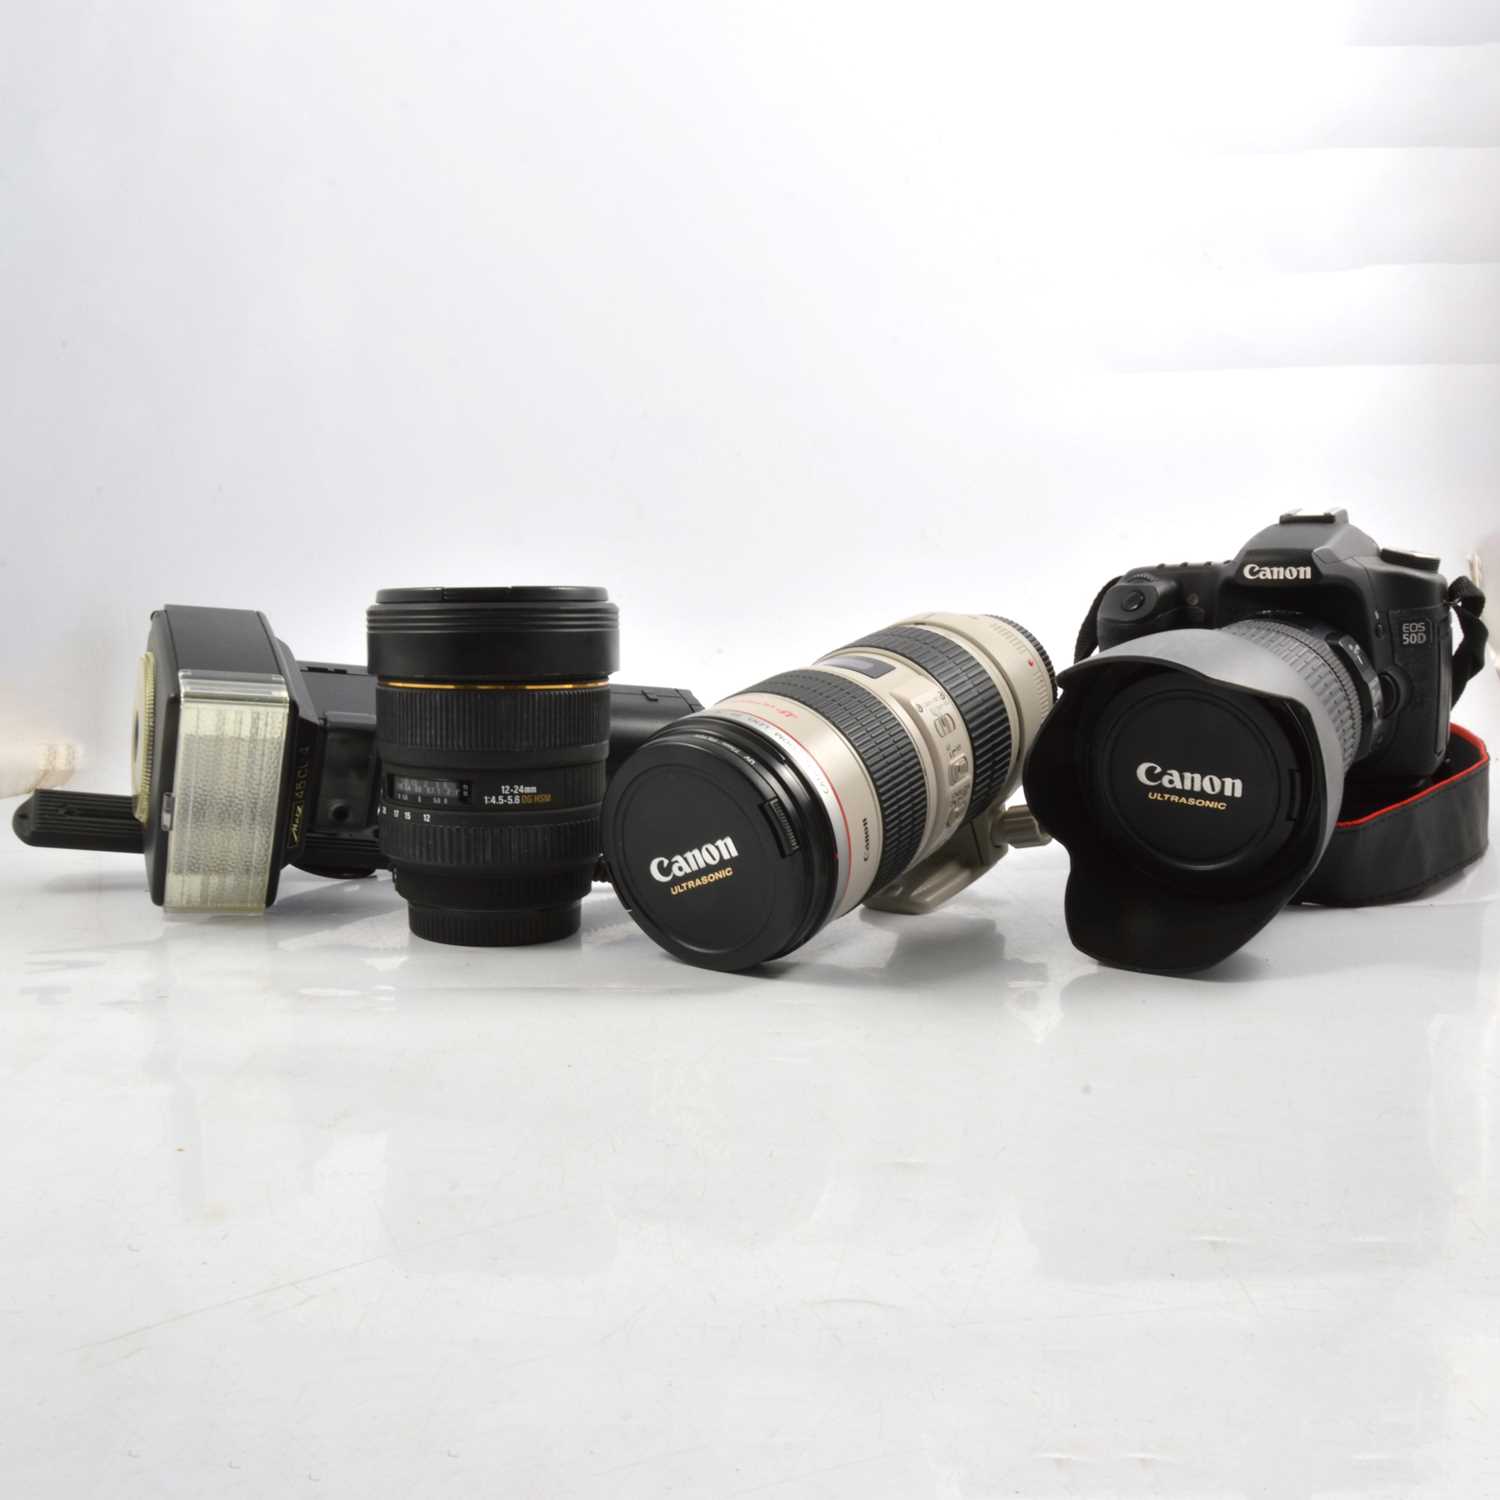 Lot 168 - Digital SLR camera equipment, to include two Canon EOS 50D camera bodies etc.